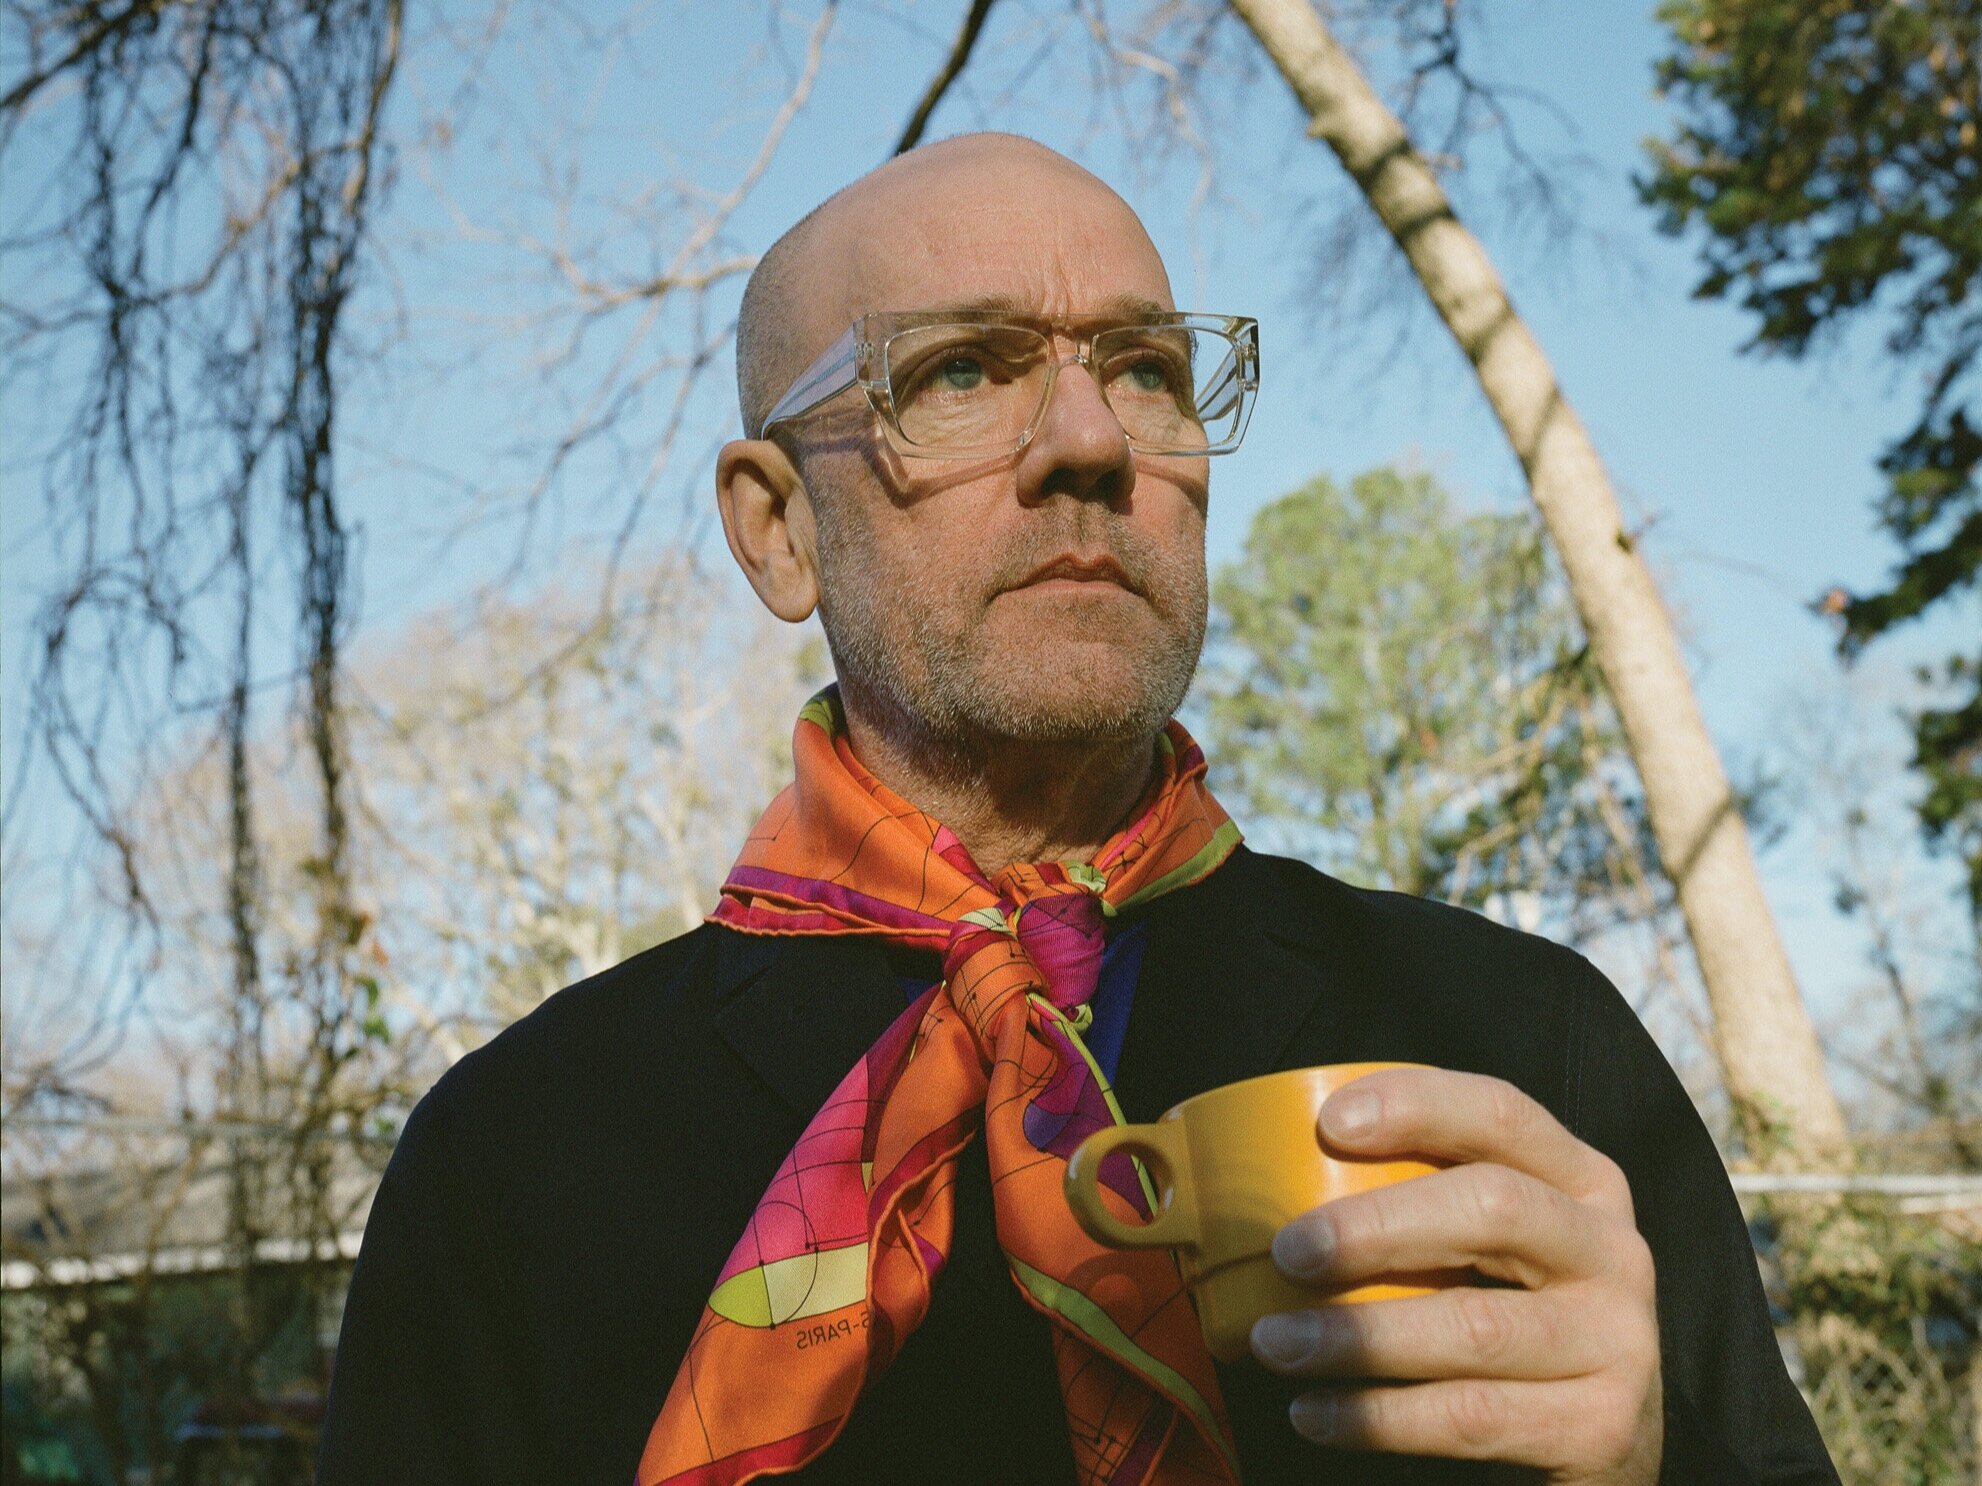 Michael Stipe Holding A Yellow Cup